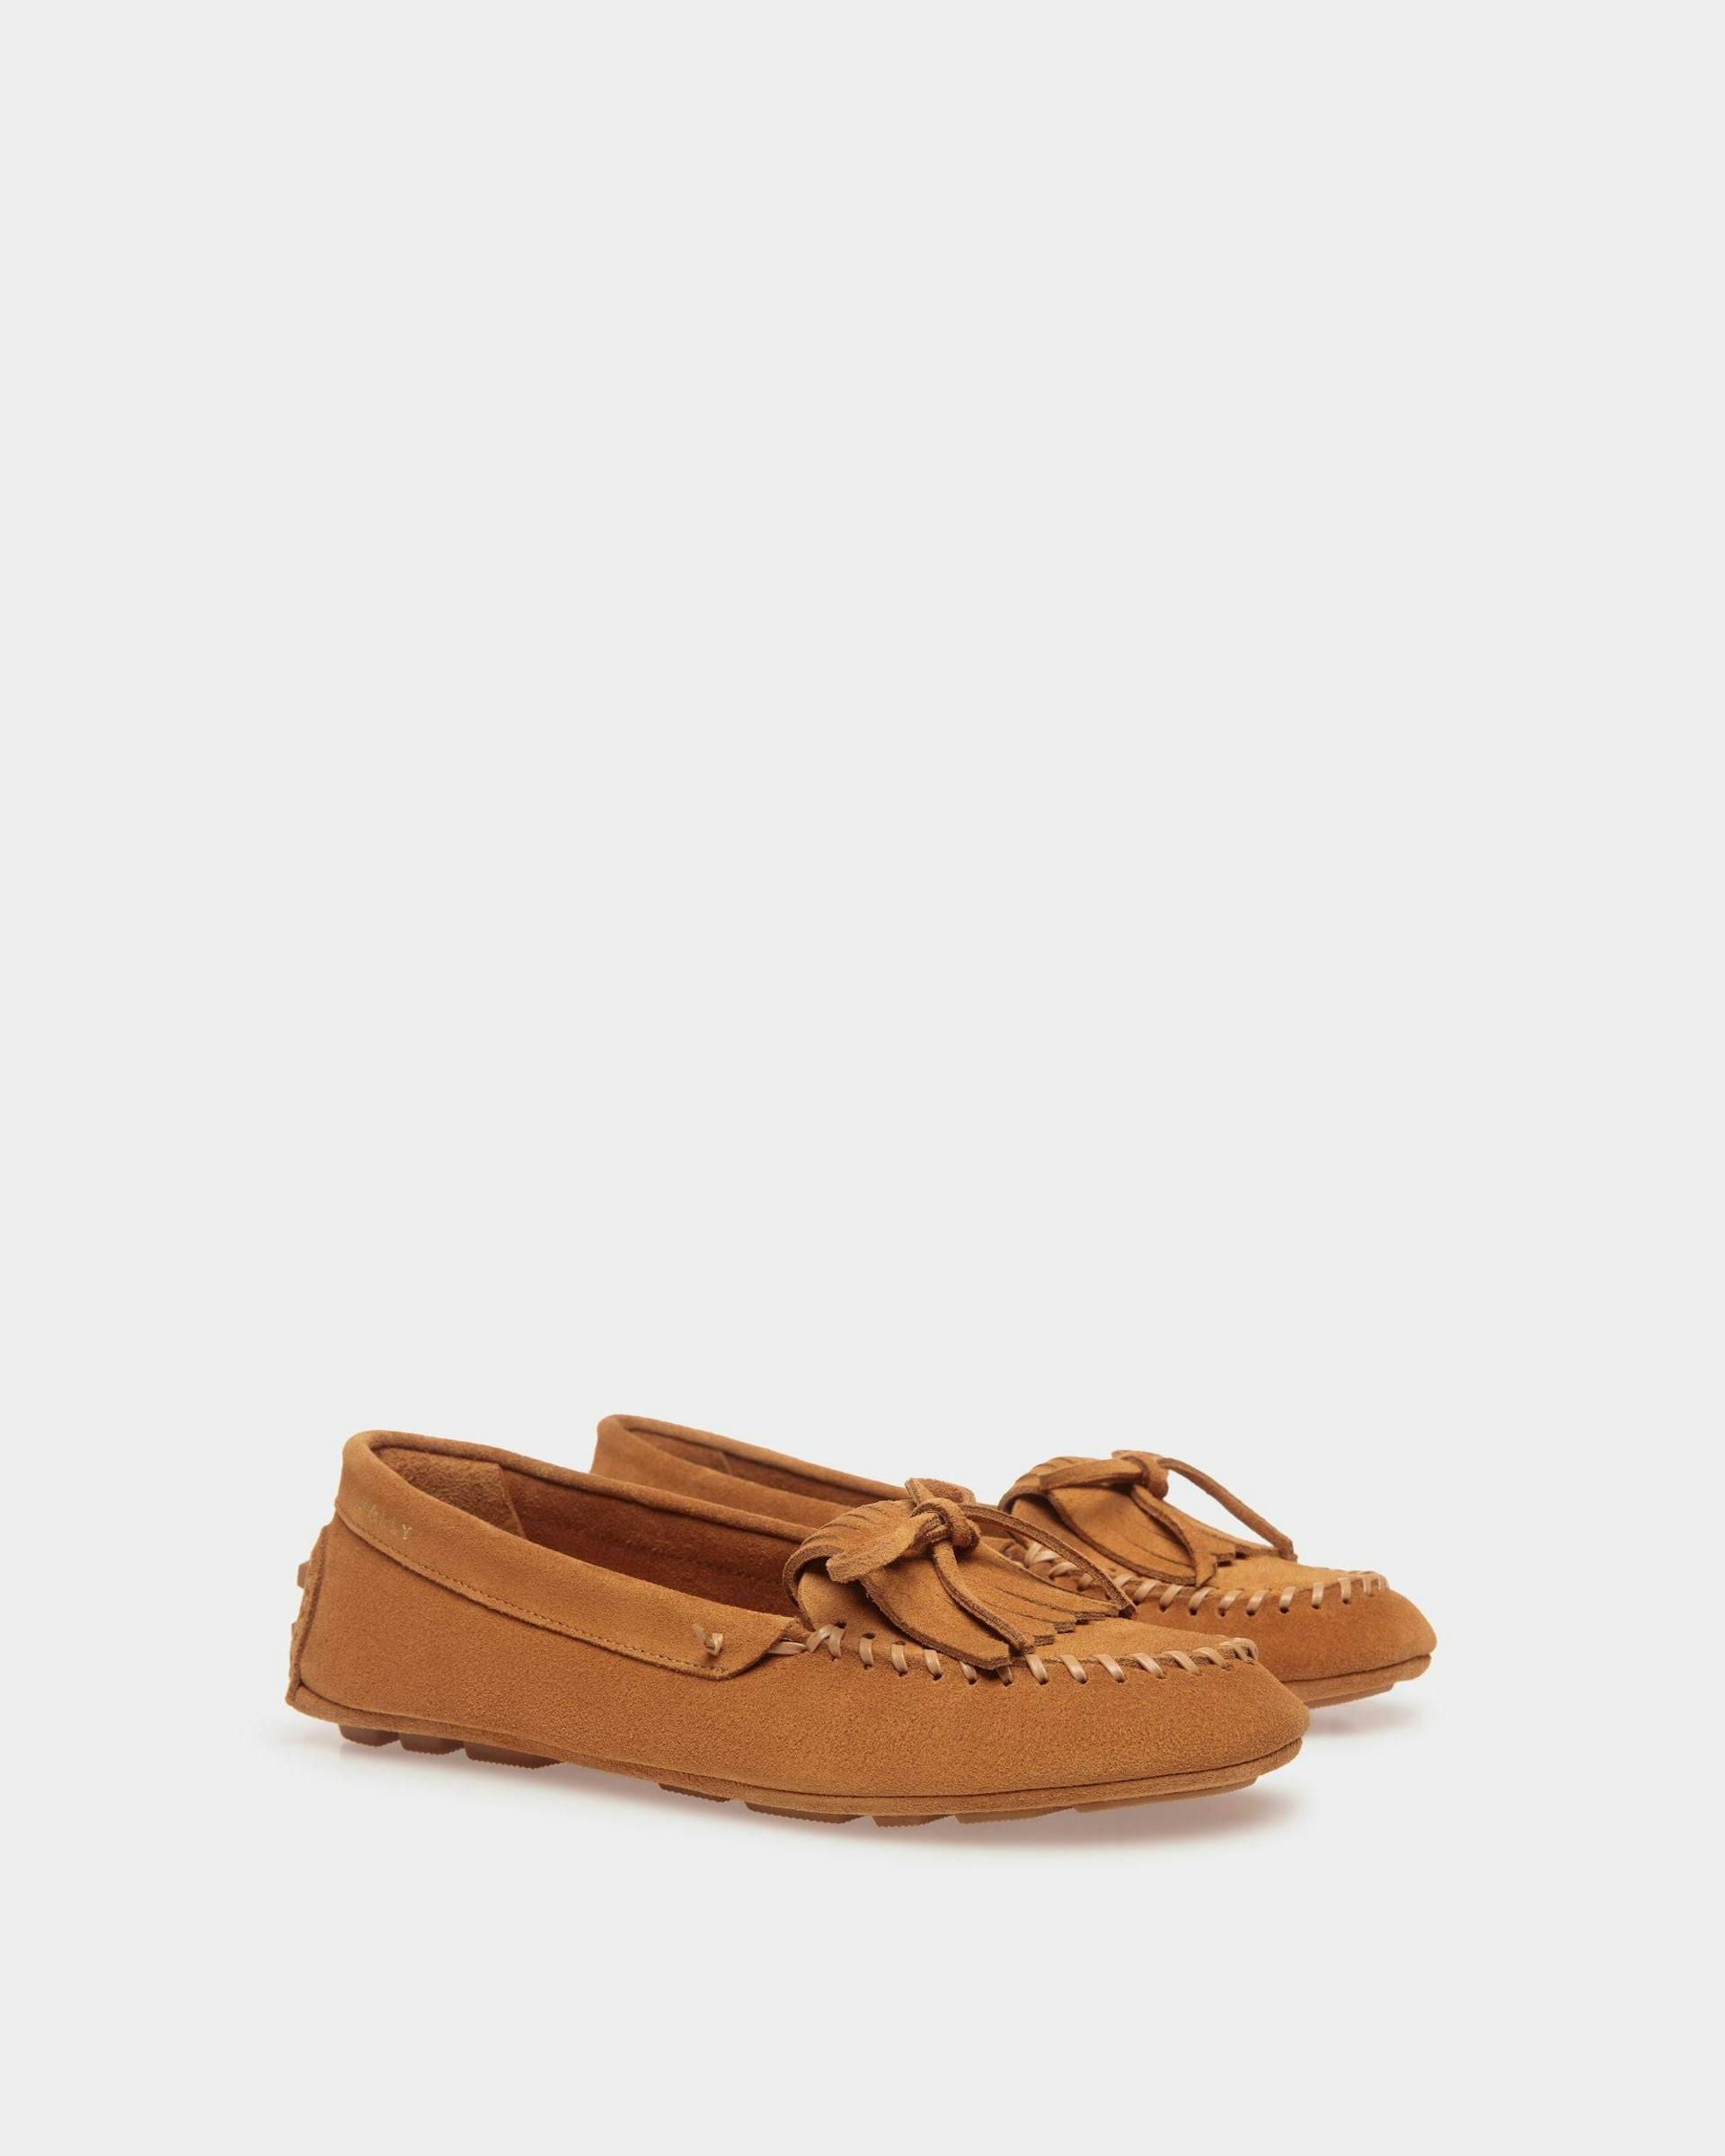 Women's Kerbs Driver in Brown Suede | Bally | Still Life 3/4 Front